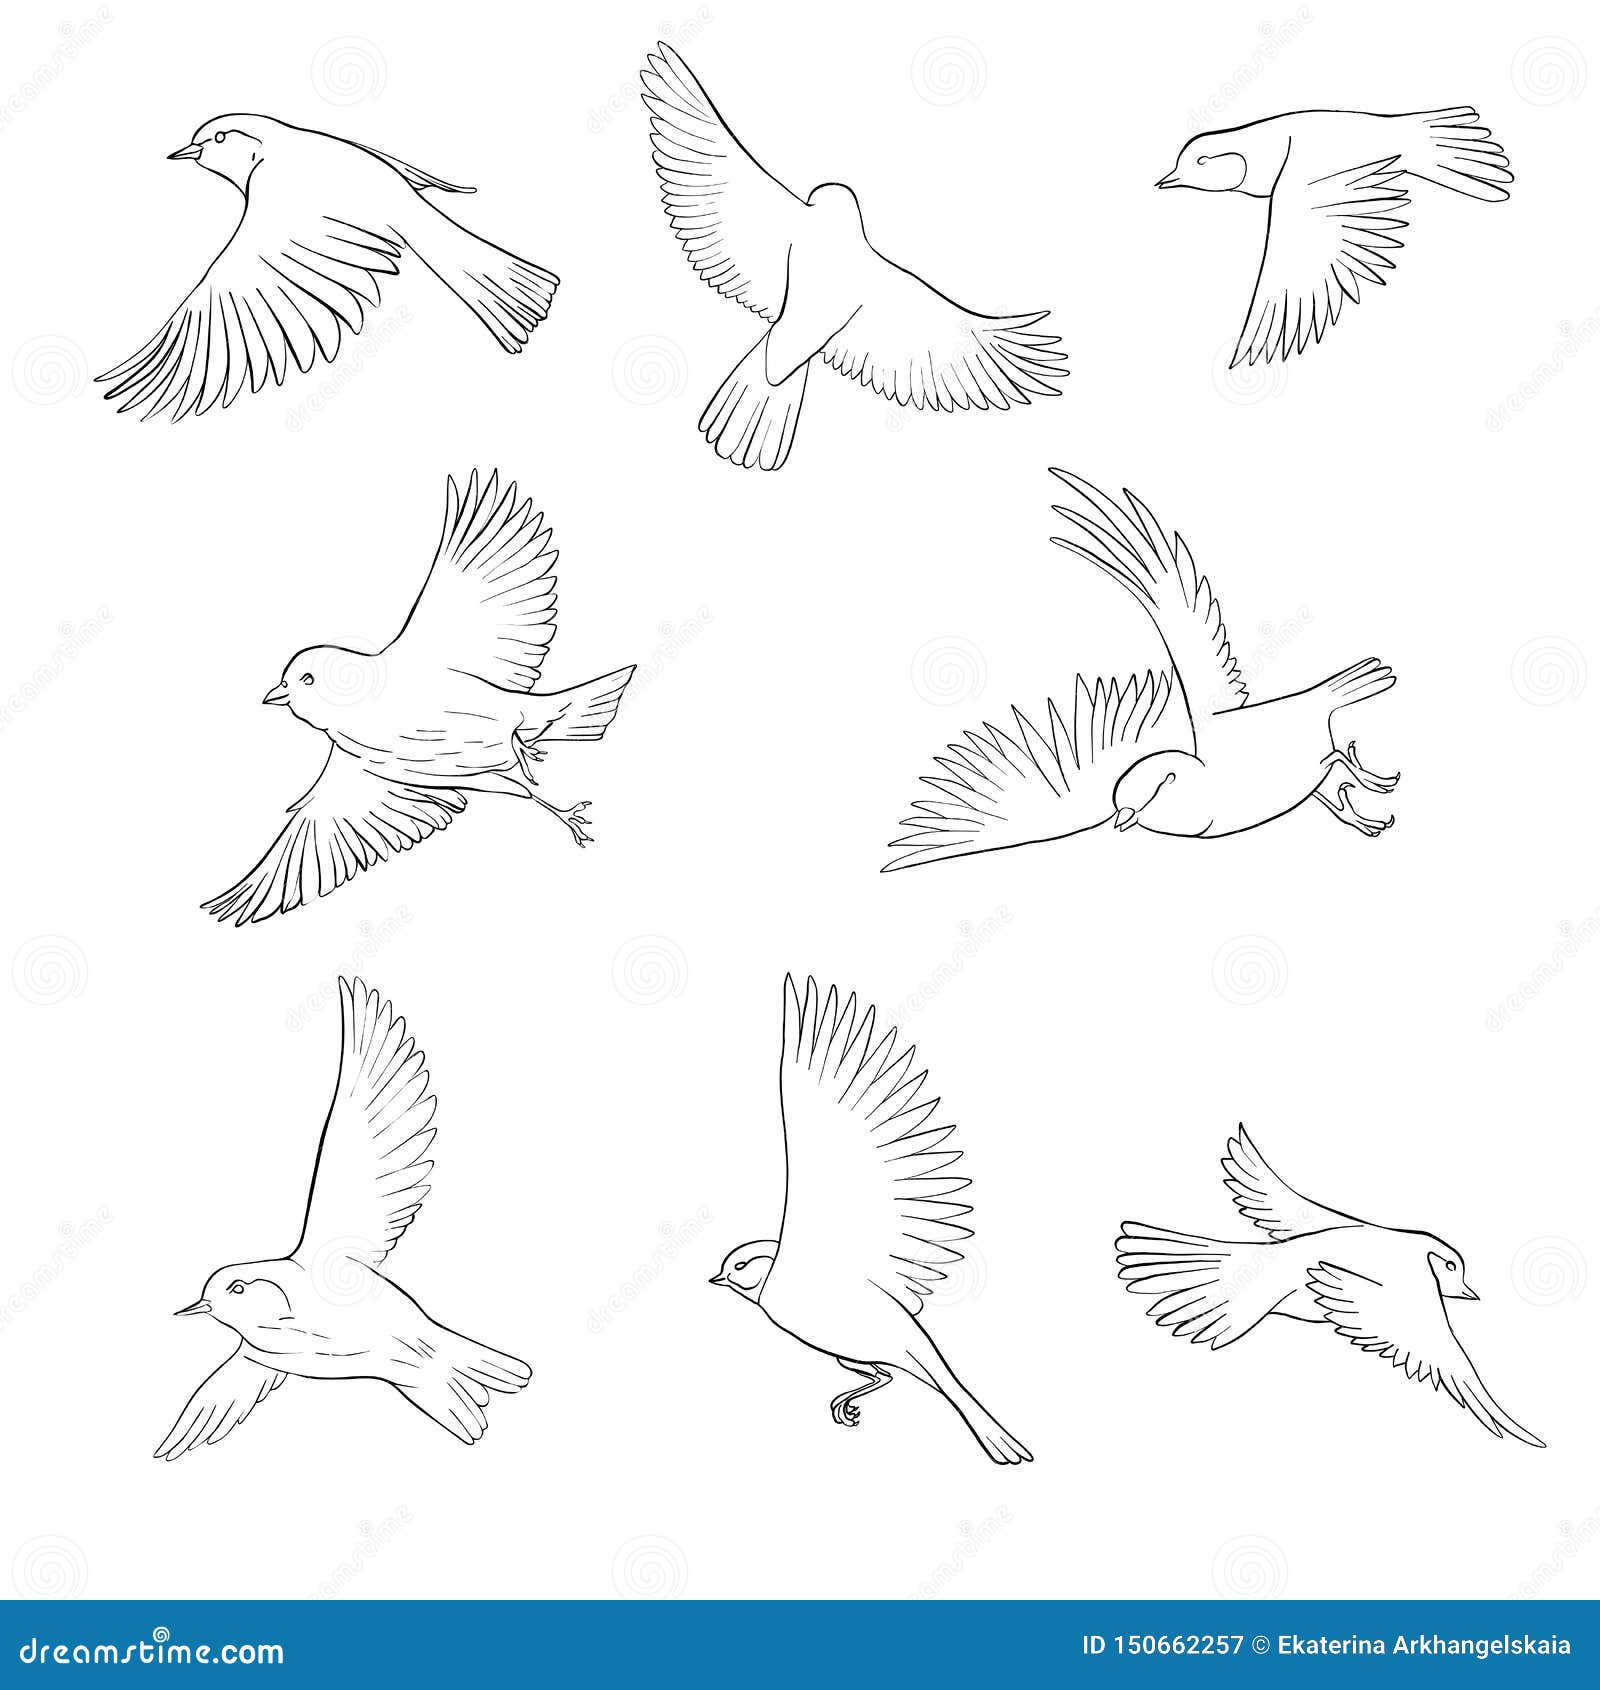 how to draw a pigeon and rose flowers with pencil sketch,how to draw birds  and flowers,bird drawing, - YouTube